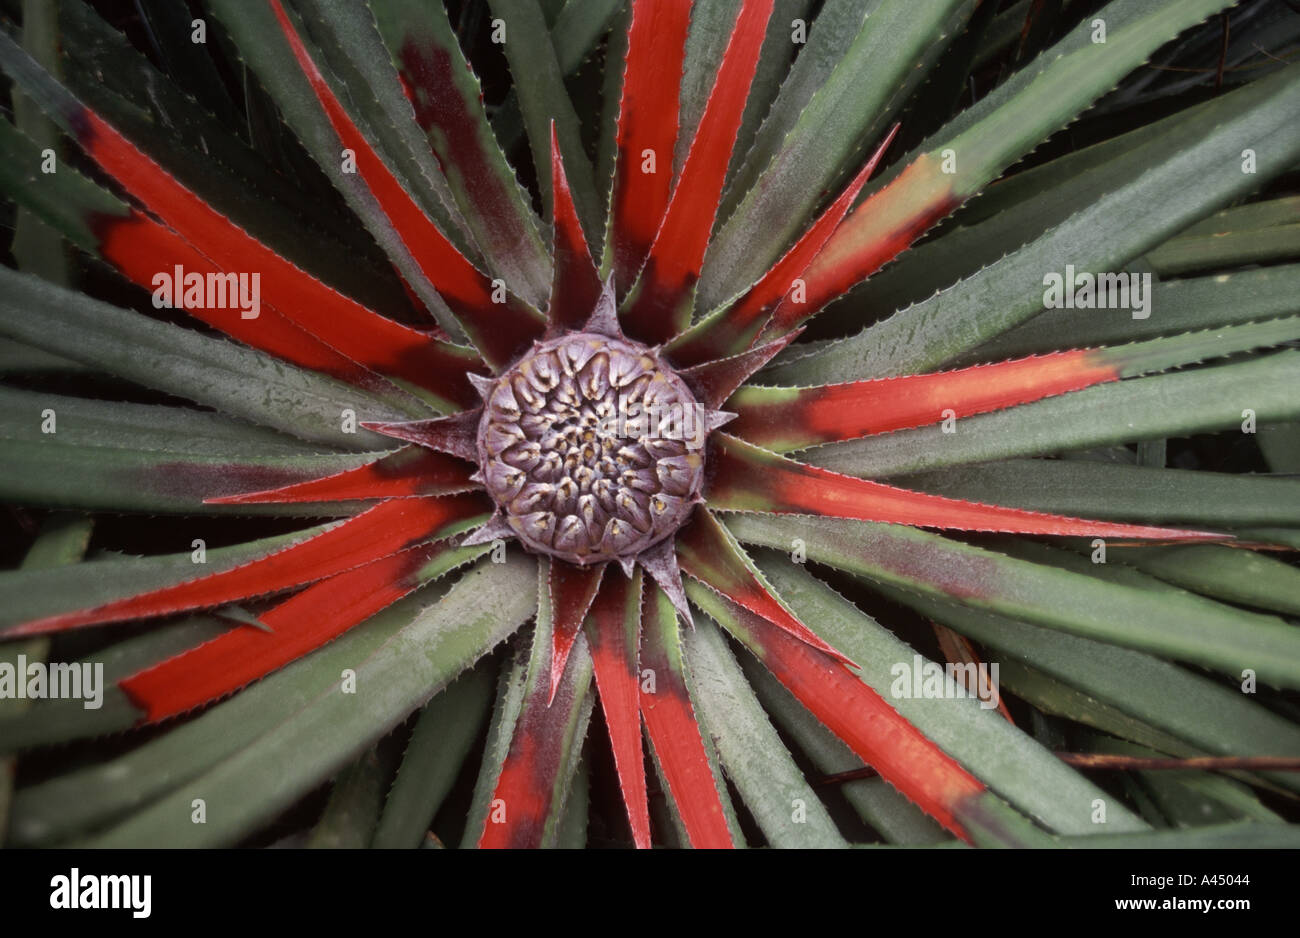 The flower of a bromeliad plant, Fascicularia pitcairnifolia, growing wild on the island of Bryher, in the Isles of Scilly, Cornwall, Great Britain. Stock Photo